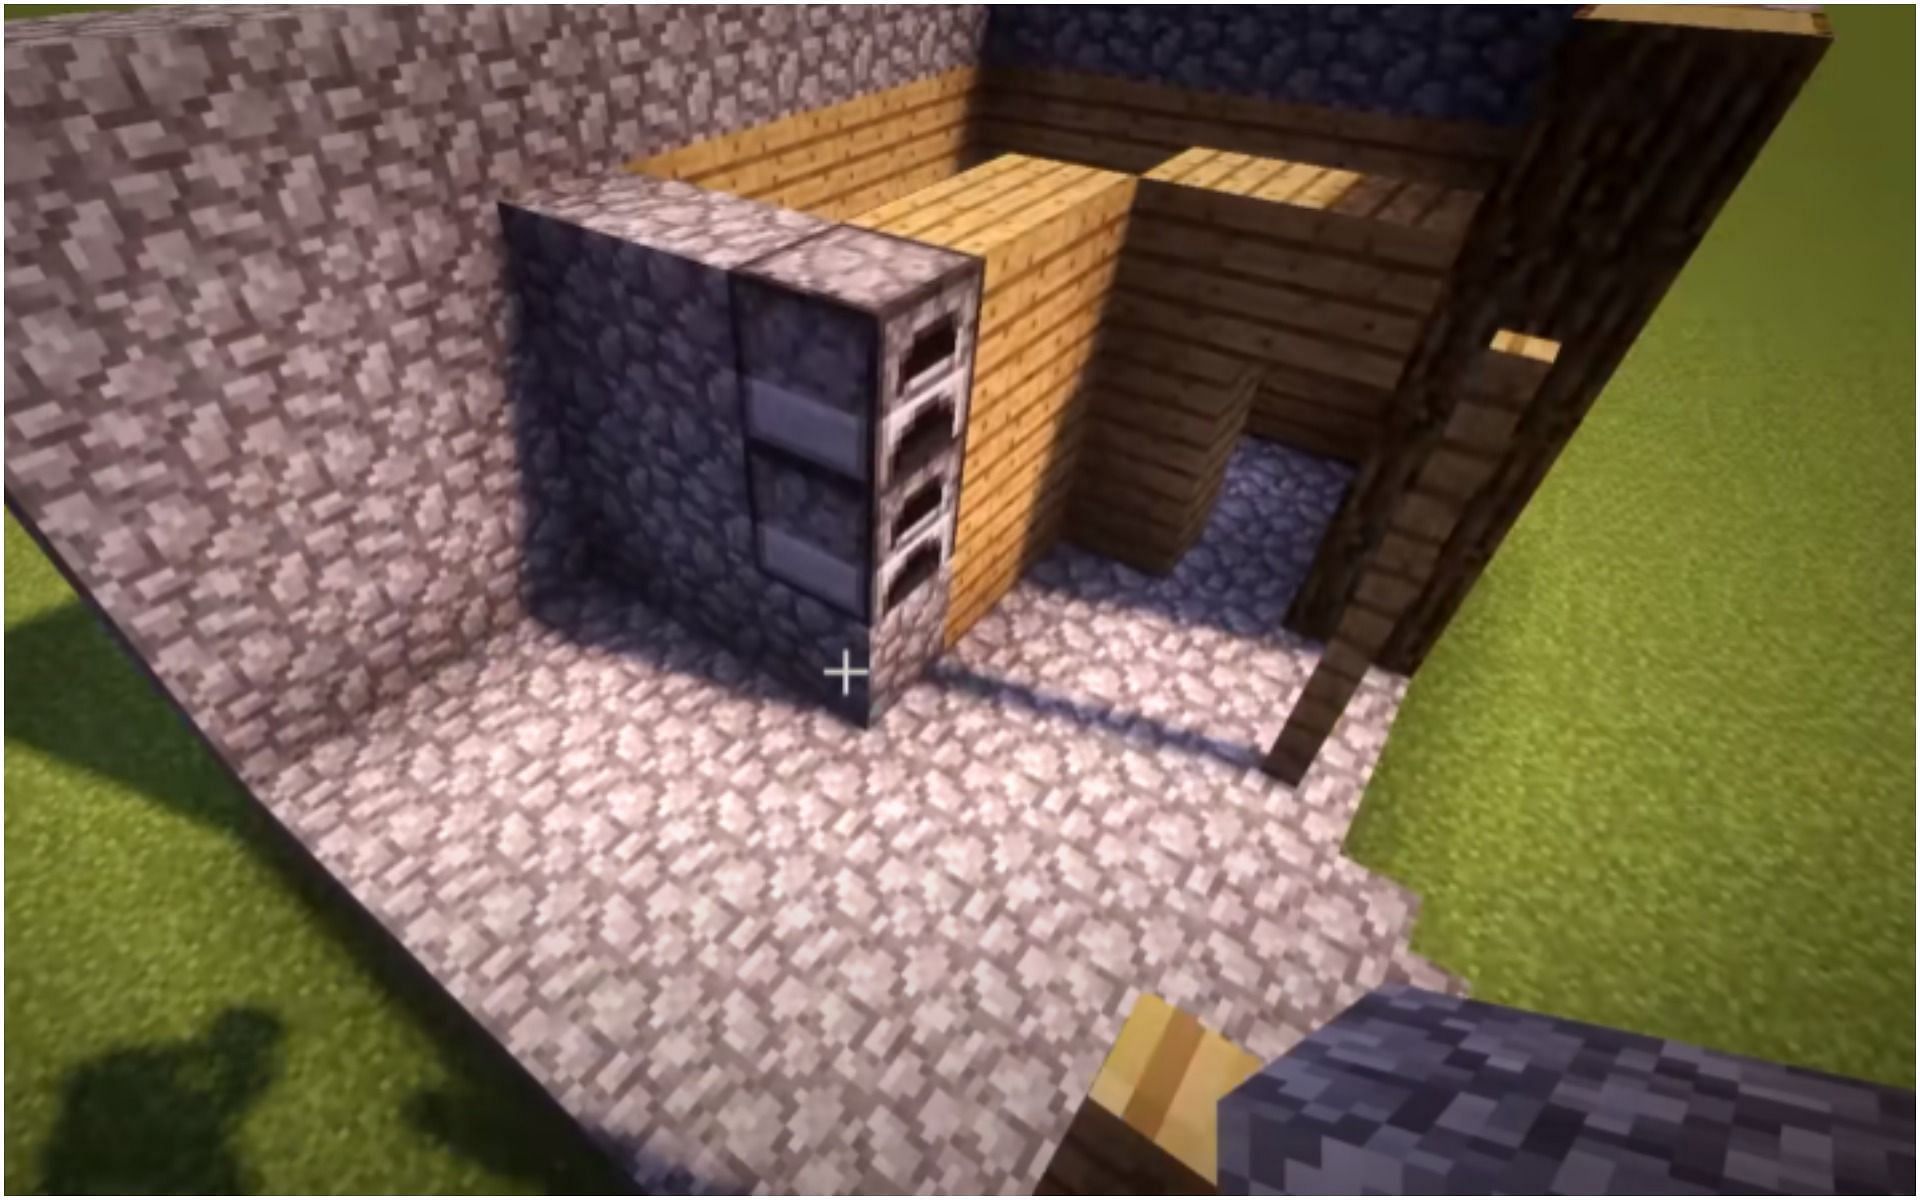 Two furnaces (Image via Minecraft)